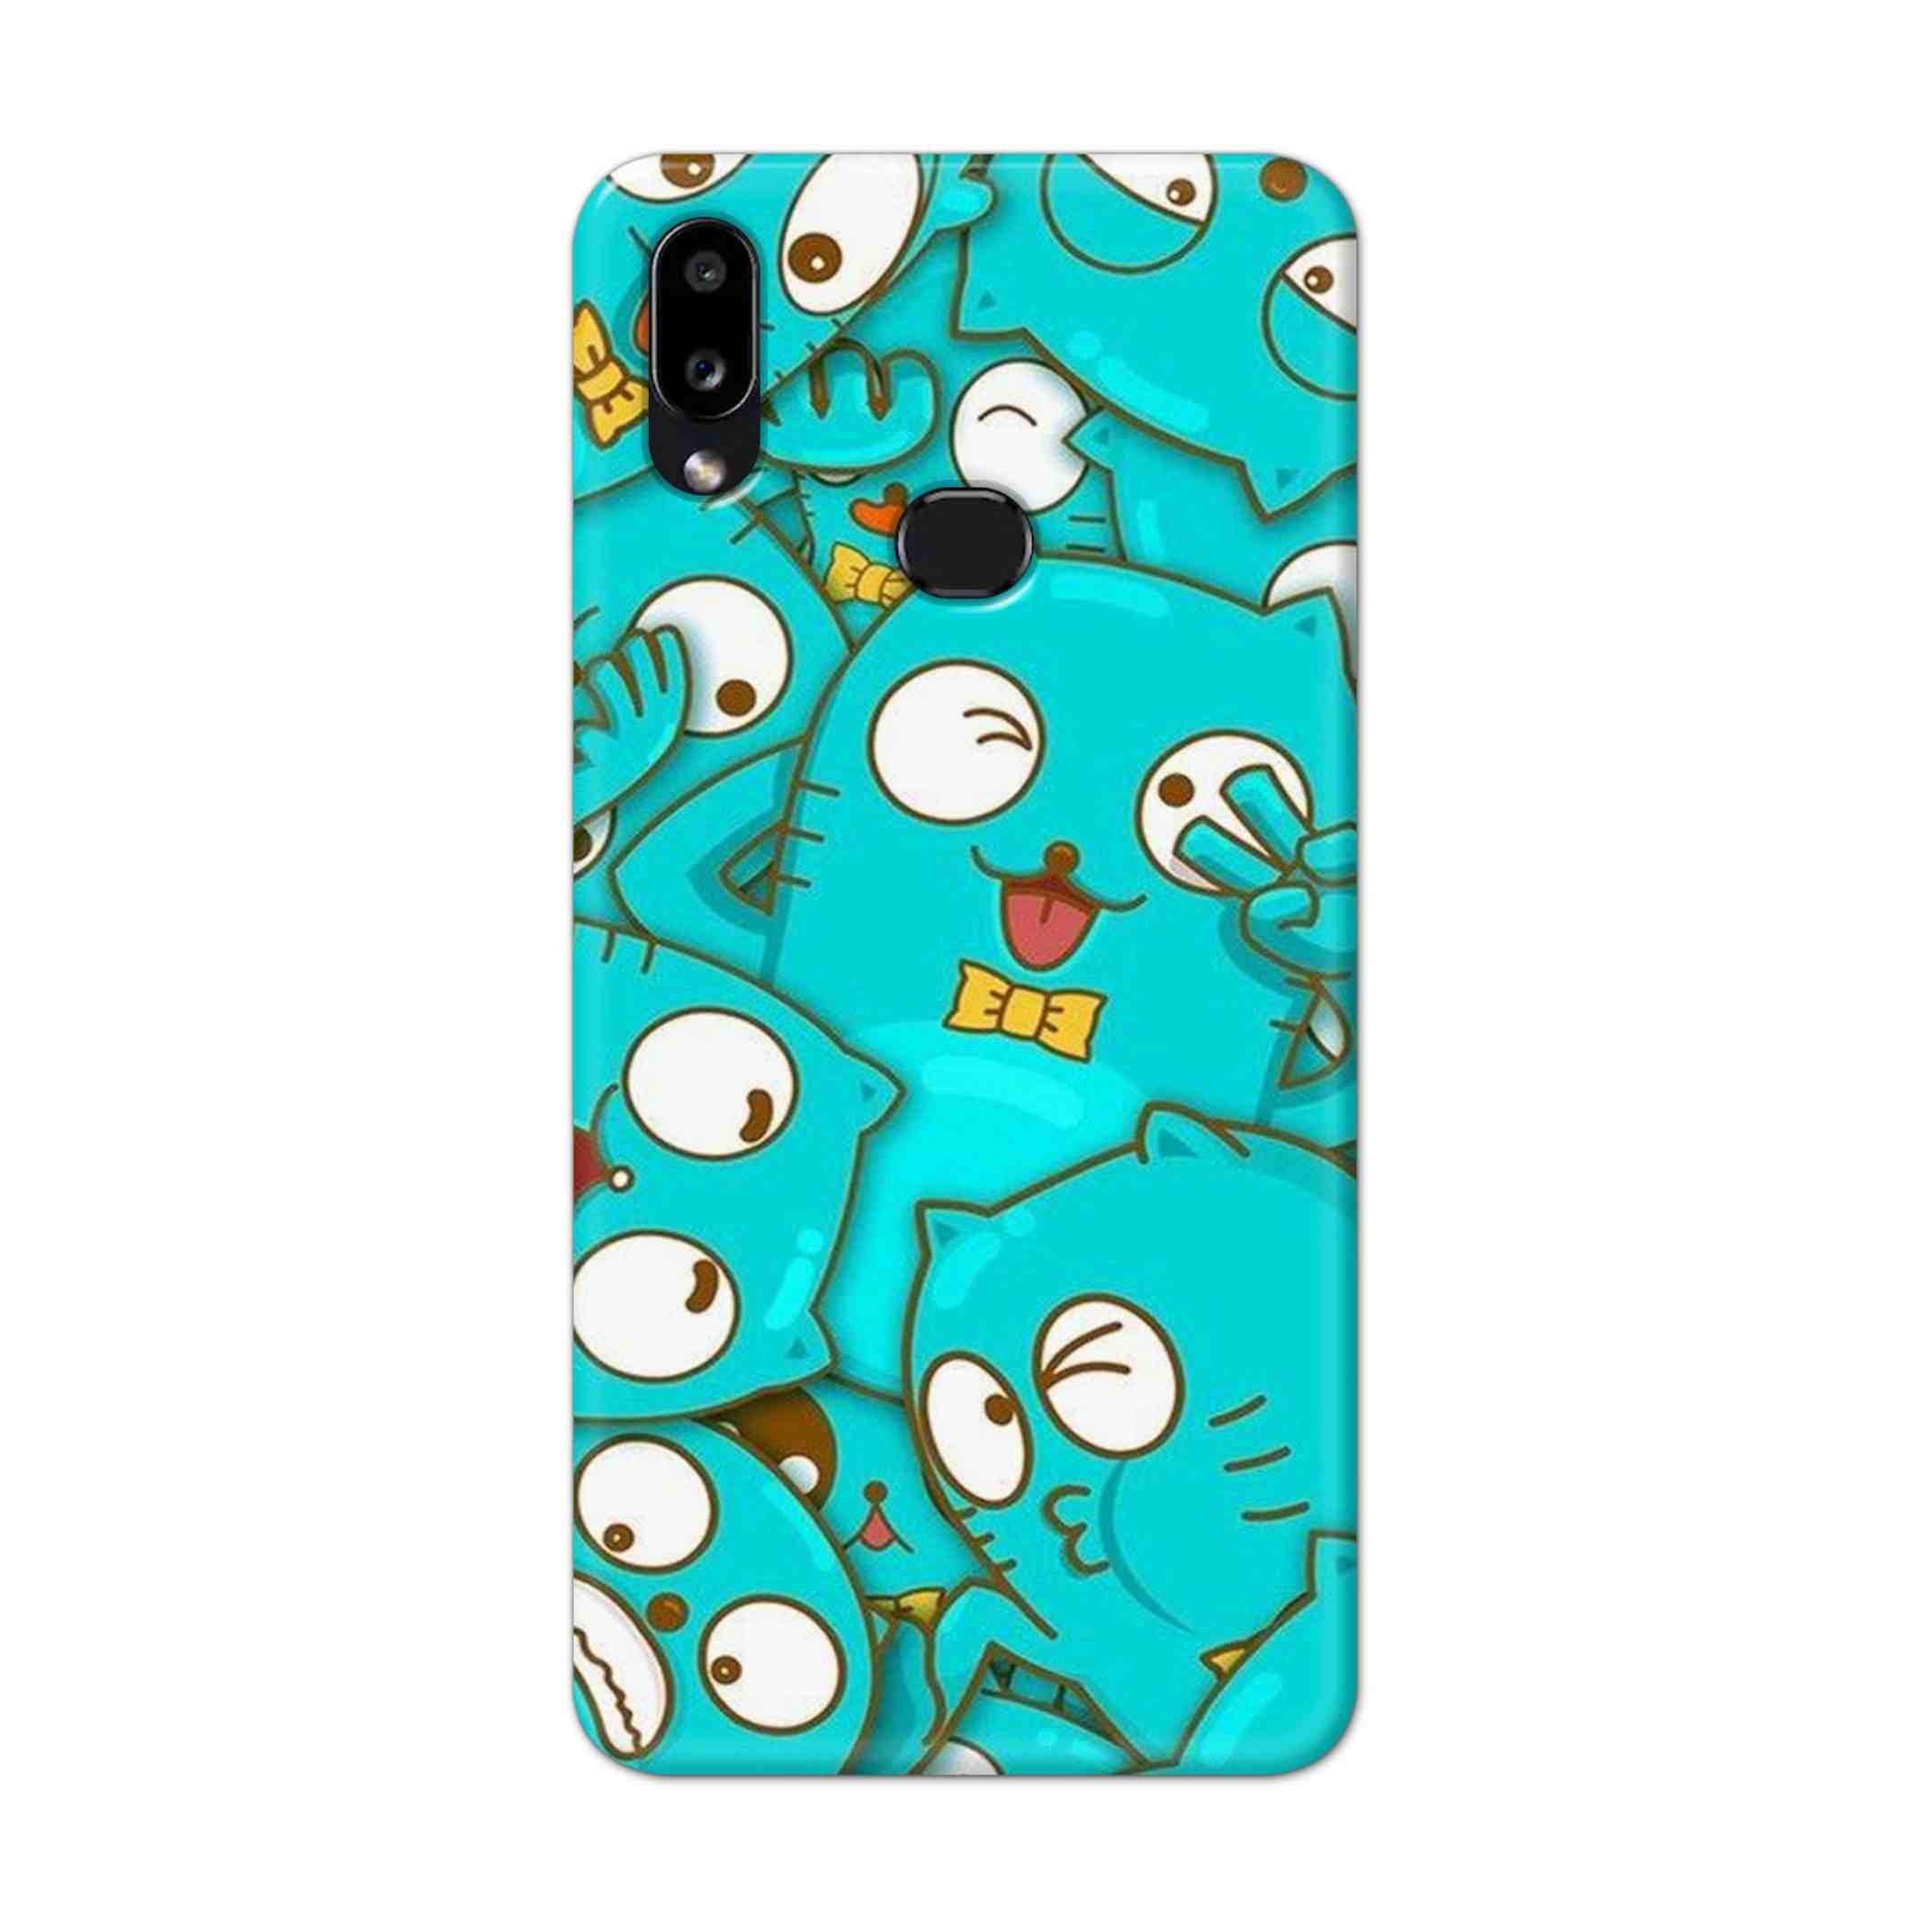 Buy Cat Hard Back Mobile Phone Case Cover For Samsung Galaxy M01s Online